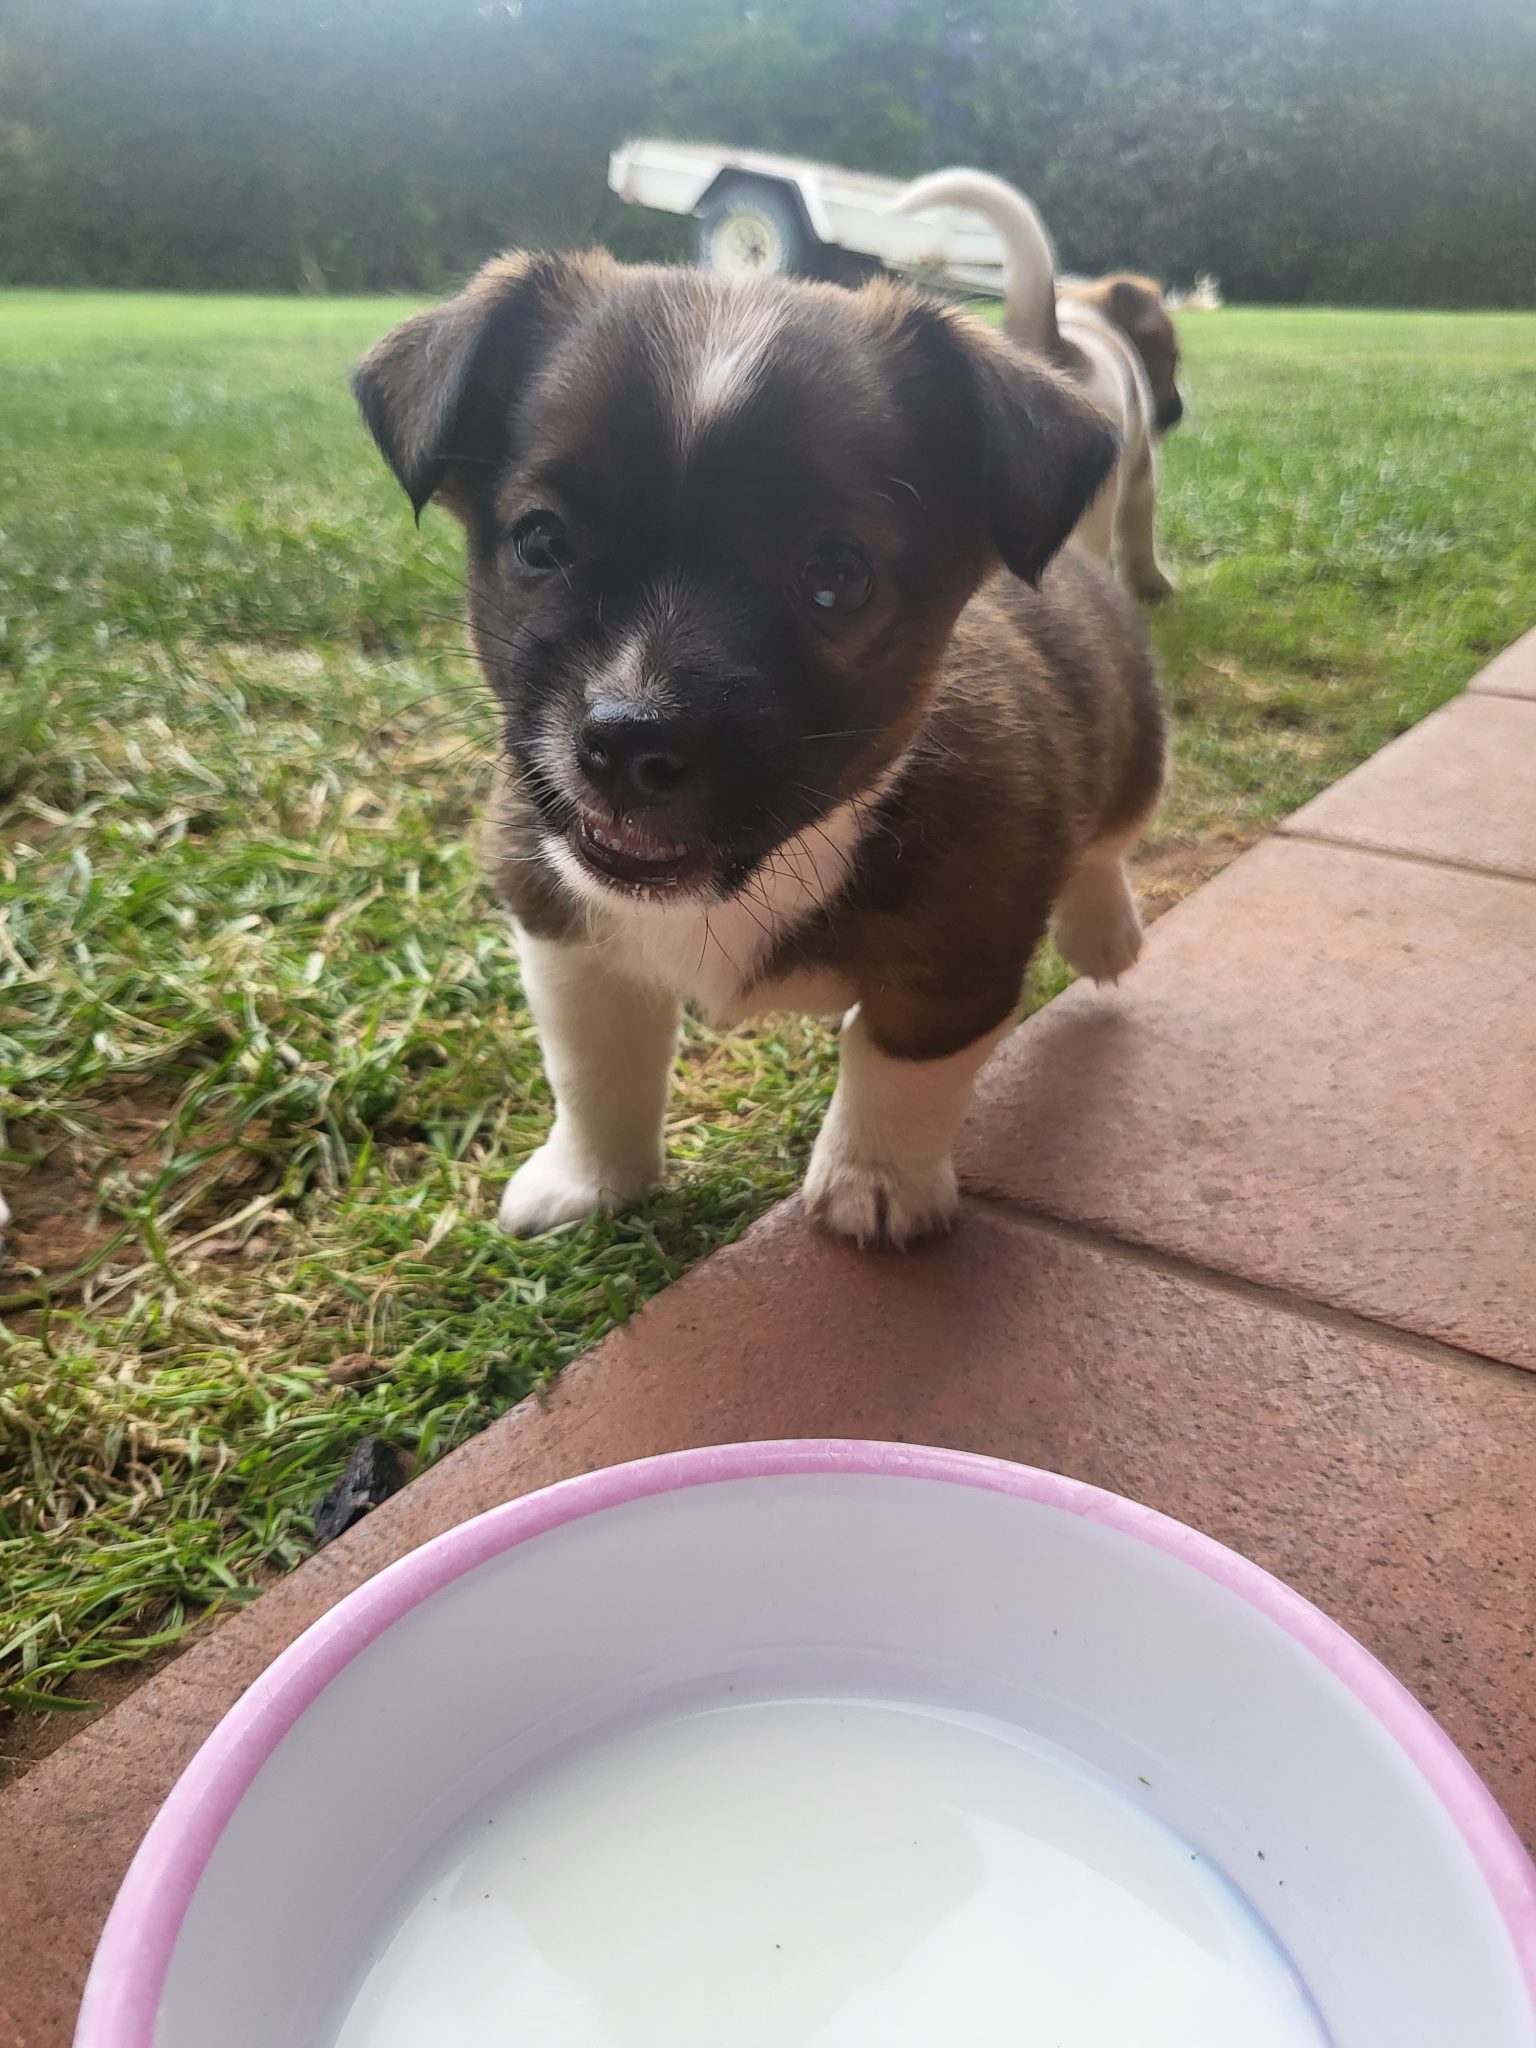 Pure bred Jack russell puppies